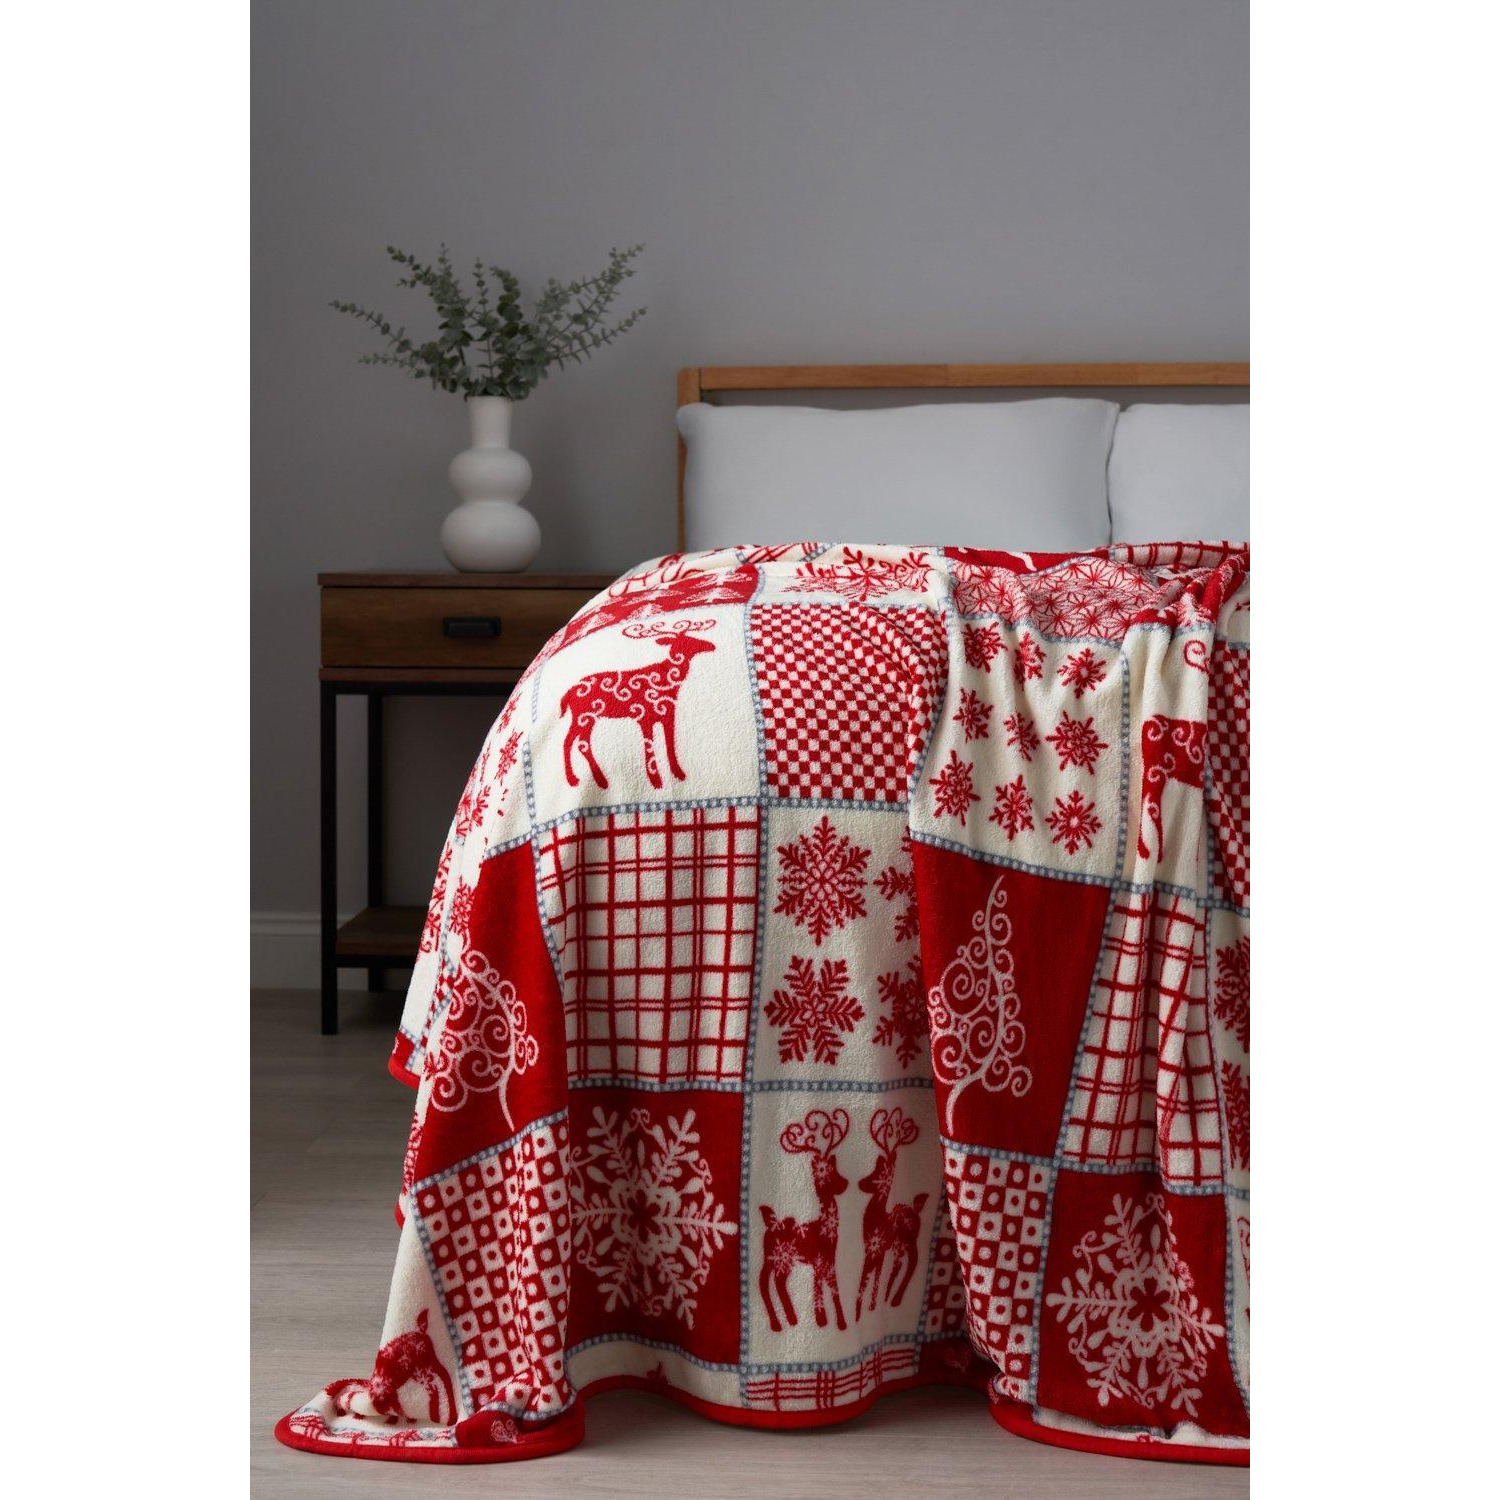 Christmas Winter Patchwork Throw - image 1